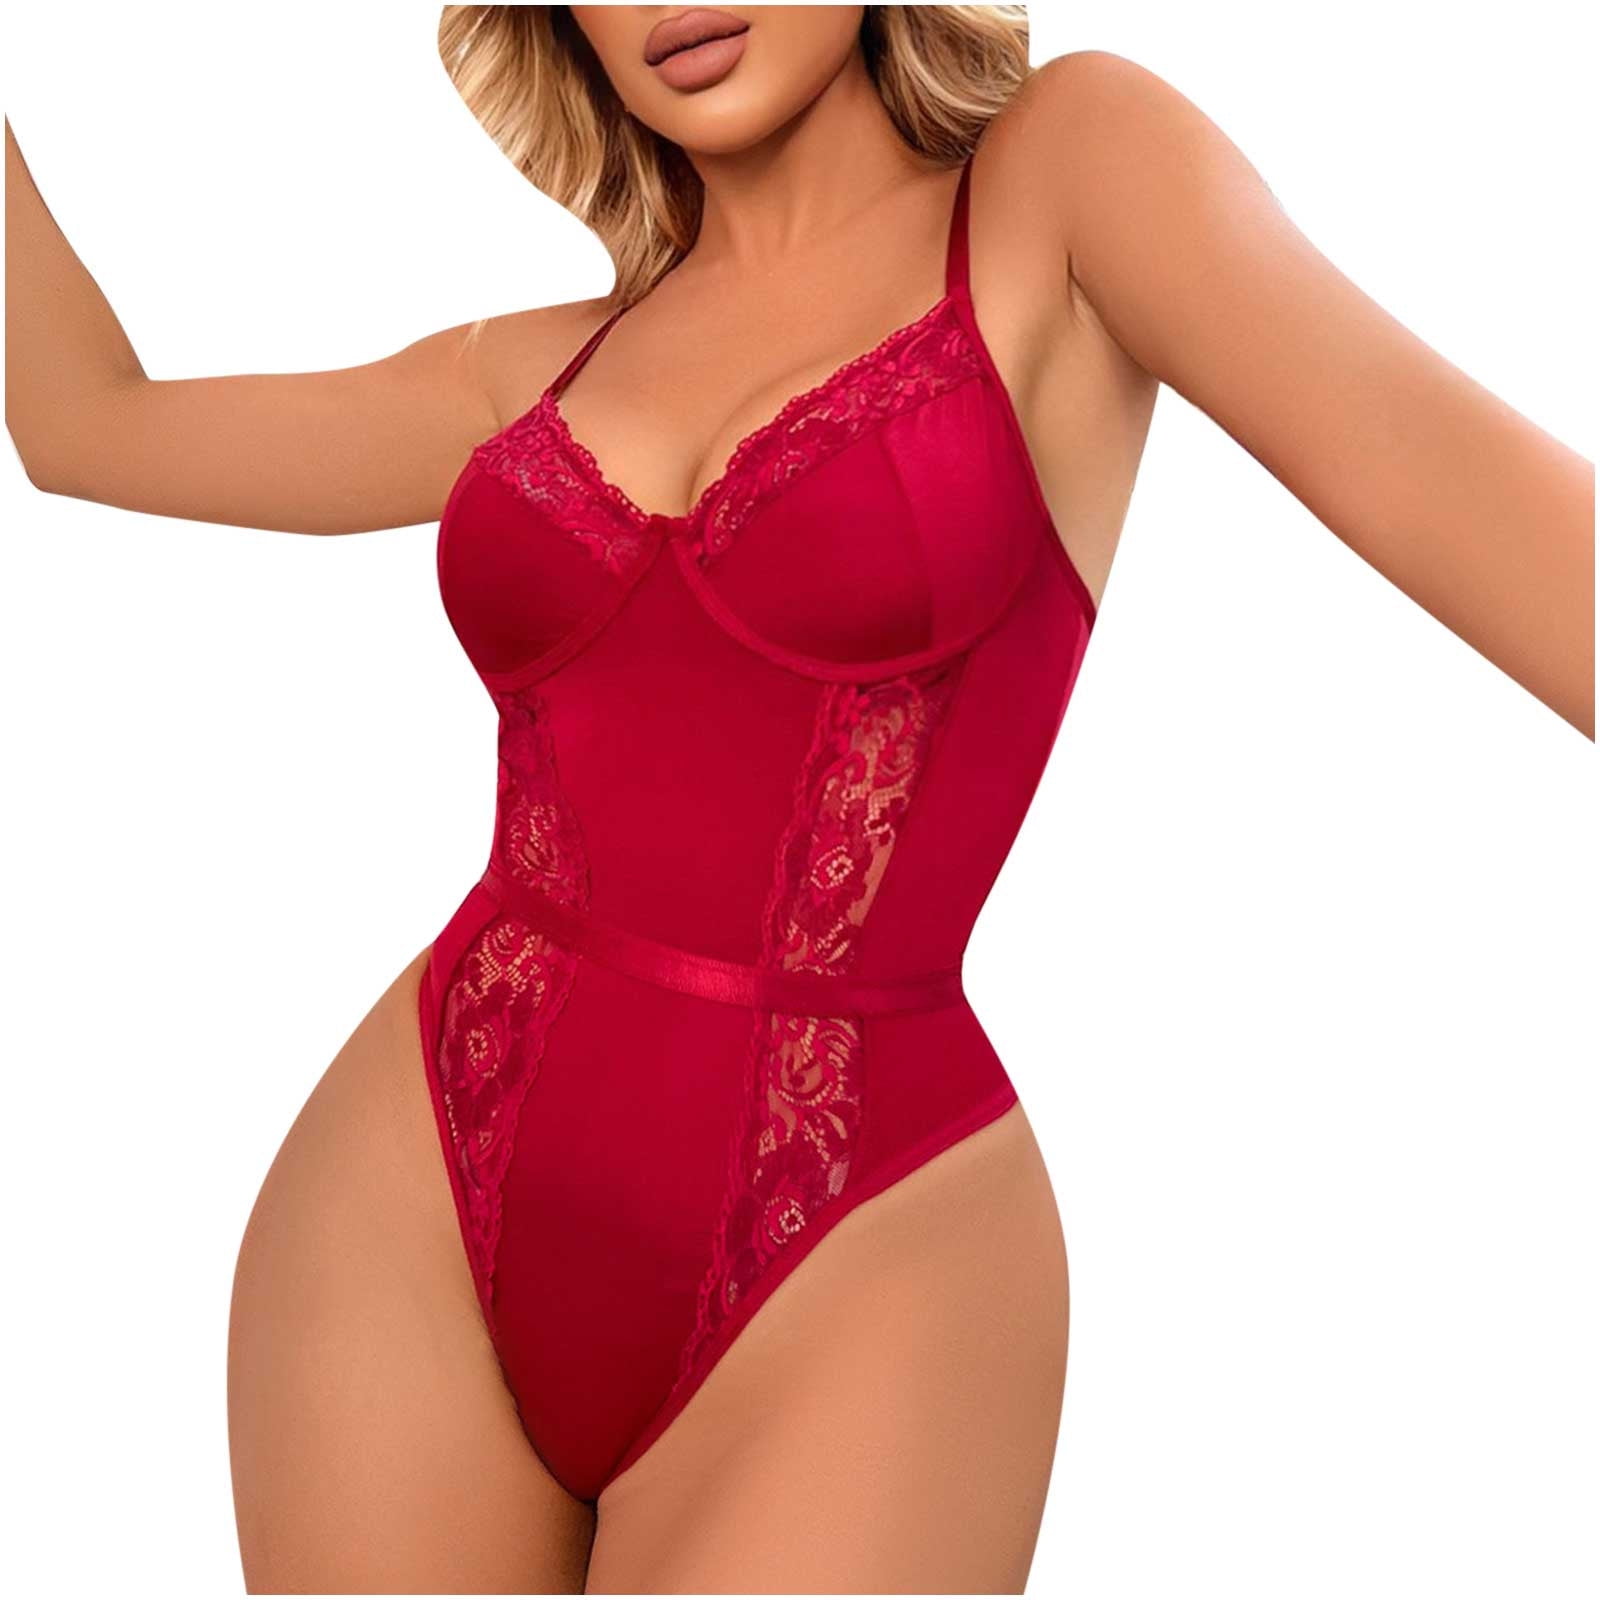 Xihbxyly Lingerie for Thick Women Ladies Cute Girl Solid Erotic